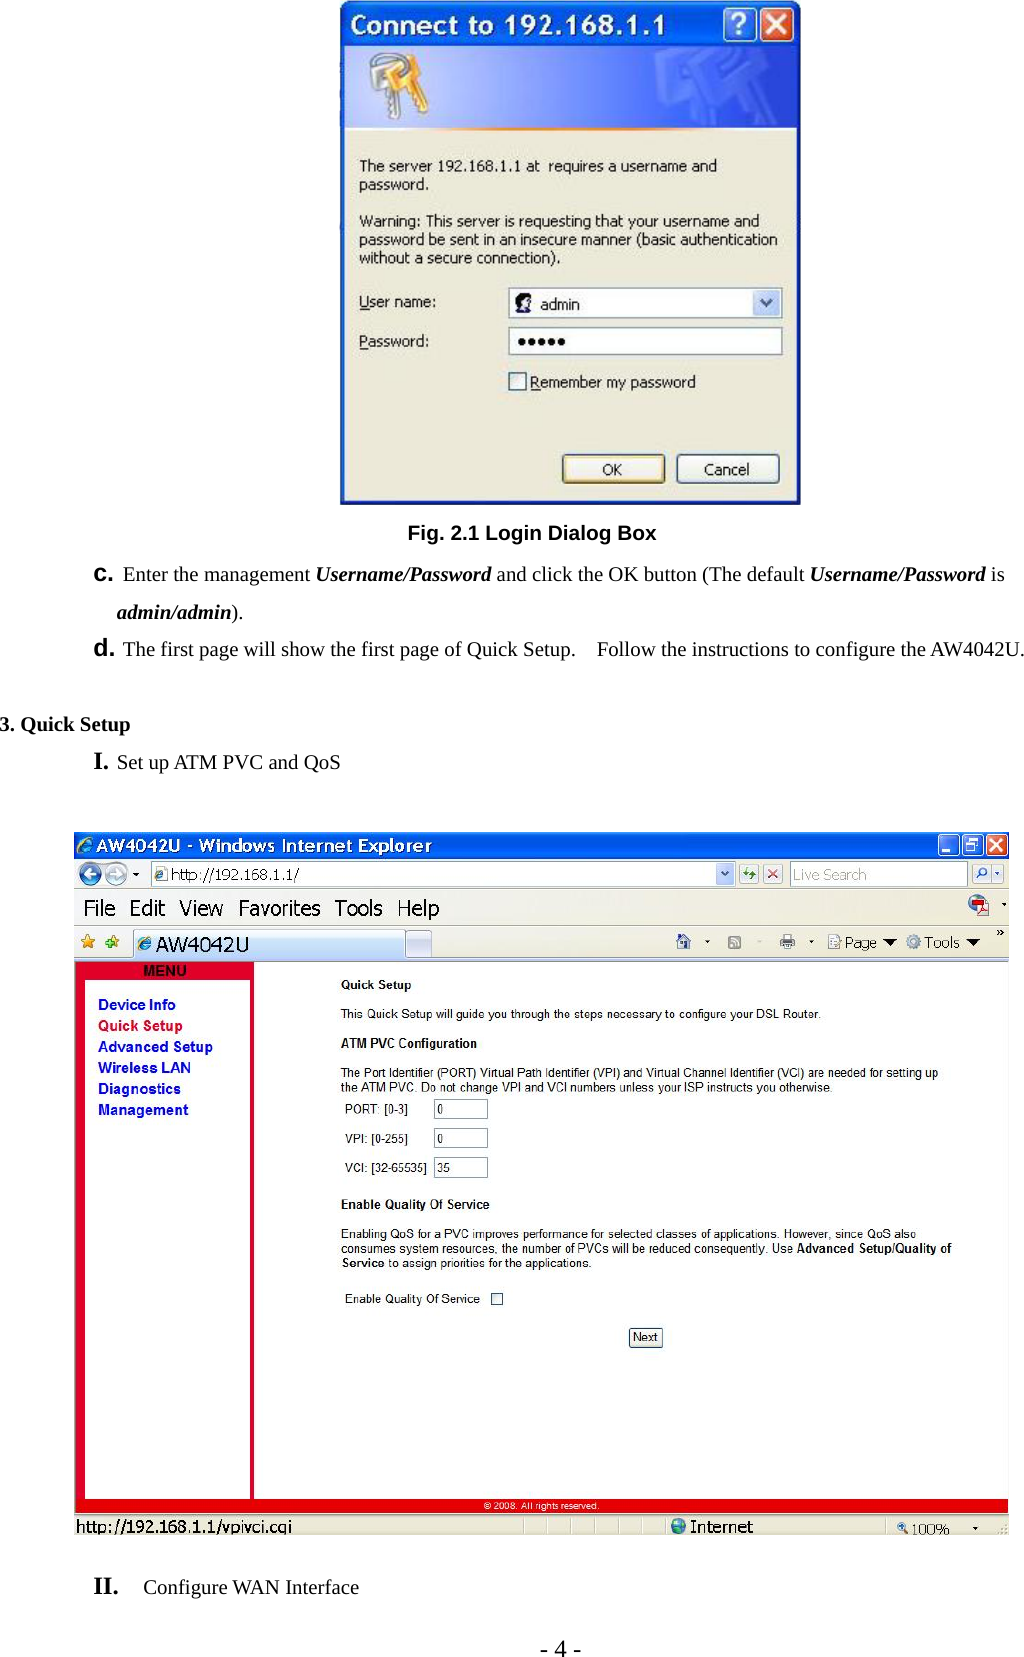  - 4 - Fig. 2.1 Login Dialog Box c. Enter the management Username/Password and click the OK button (The default Username/Password is admin/admin). d. The first page will show the first page of Quick Setup.    Follow the instructions to configure the AW4042U.  3. Quick Setup I. Set up ATM PVC and QoS                      II. Configure WAN Interface 